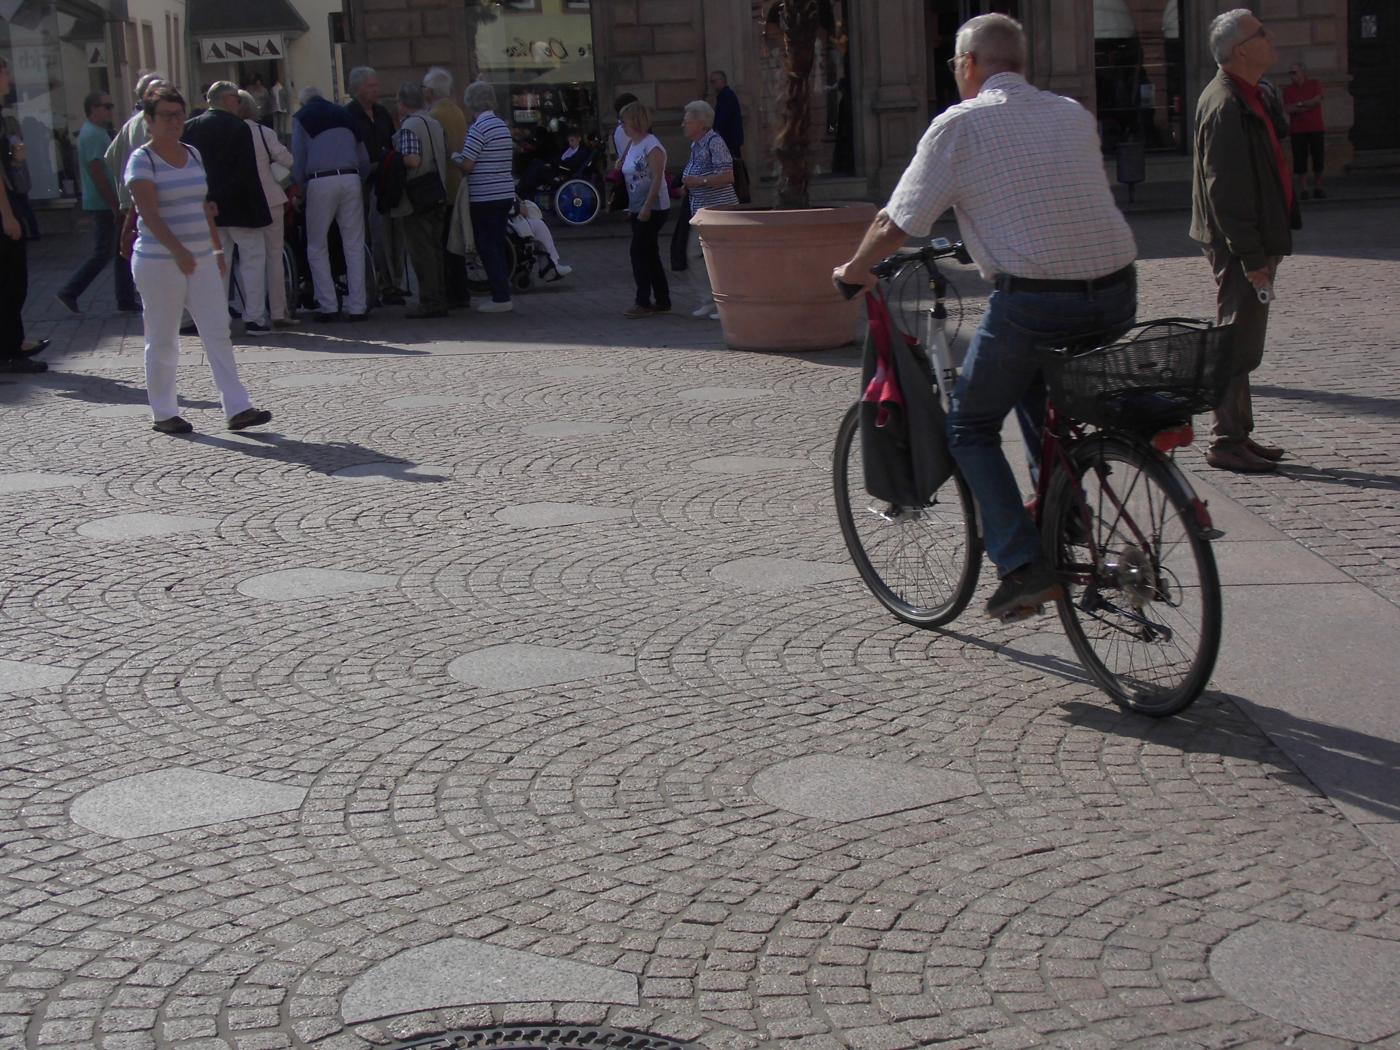 Jehovah's Witnesses invisible in Speyer